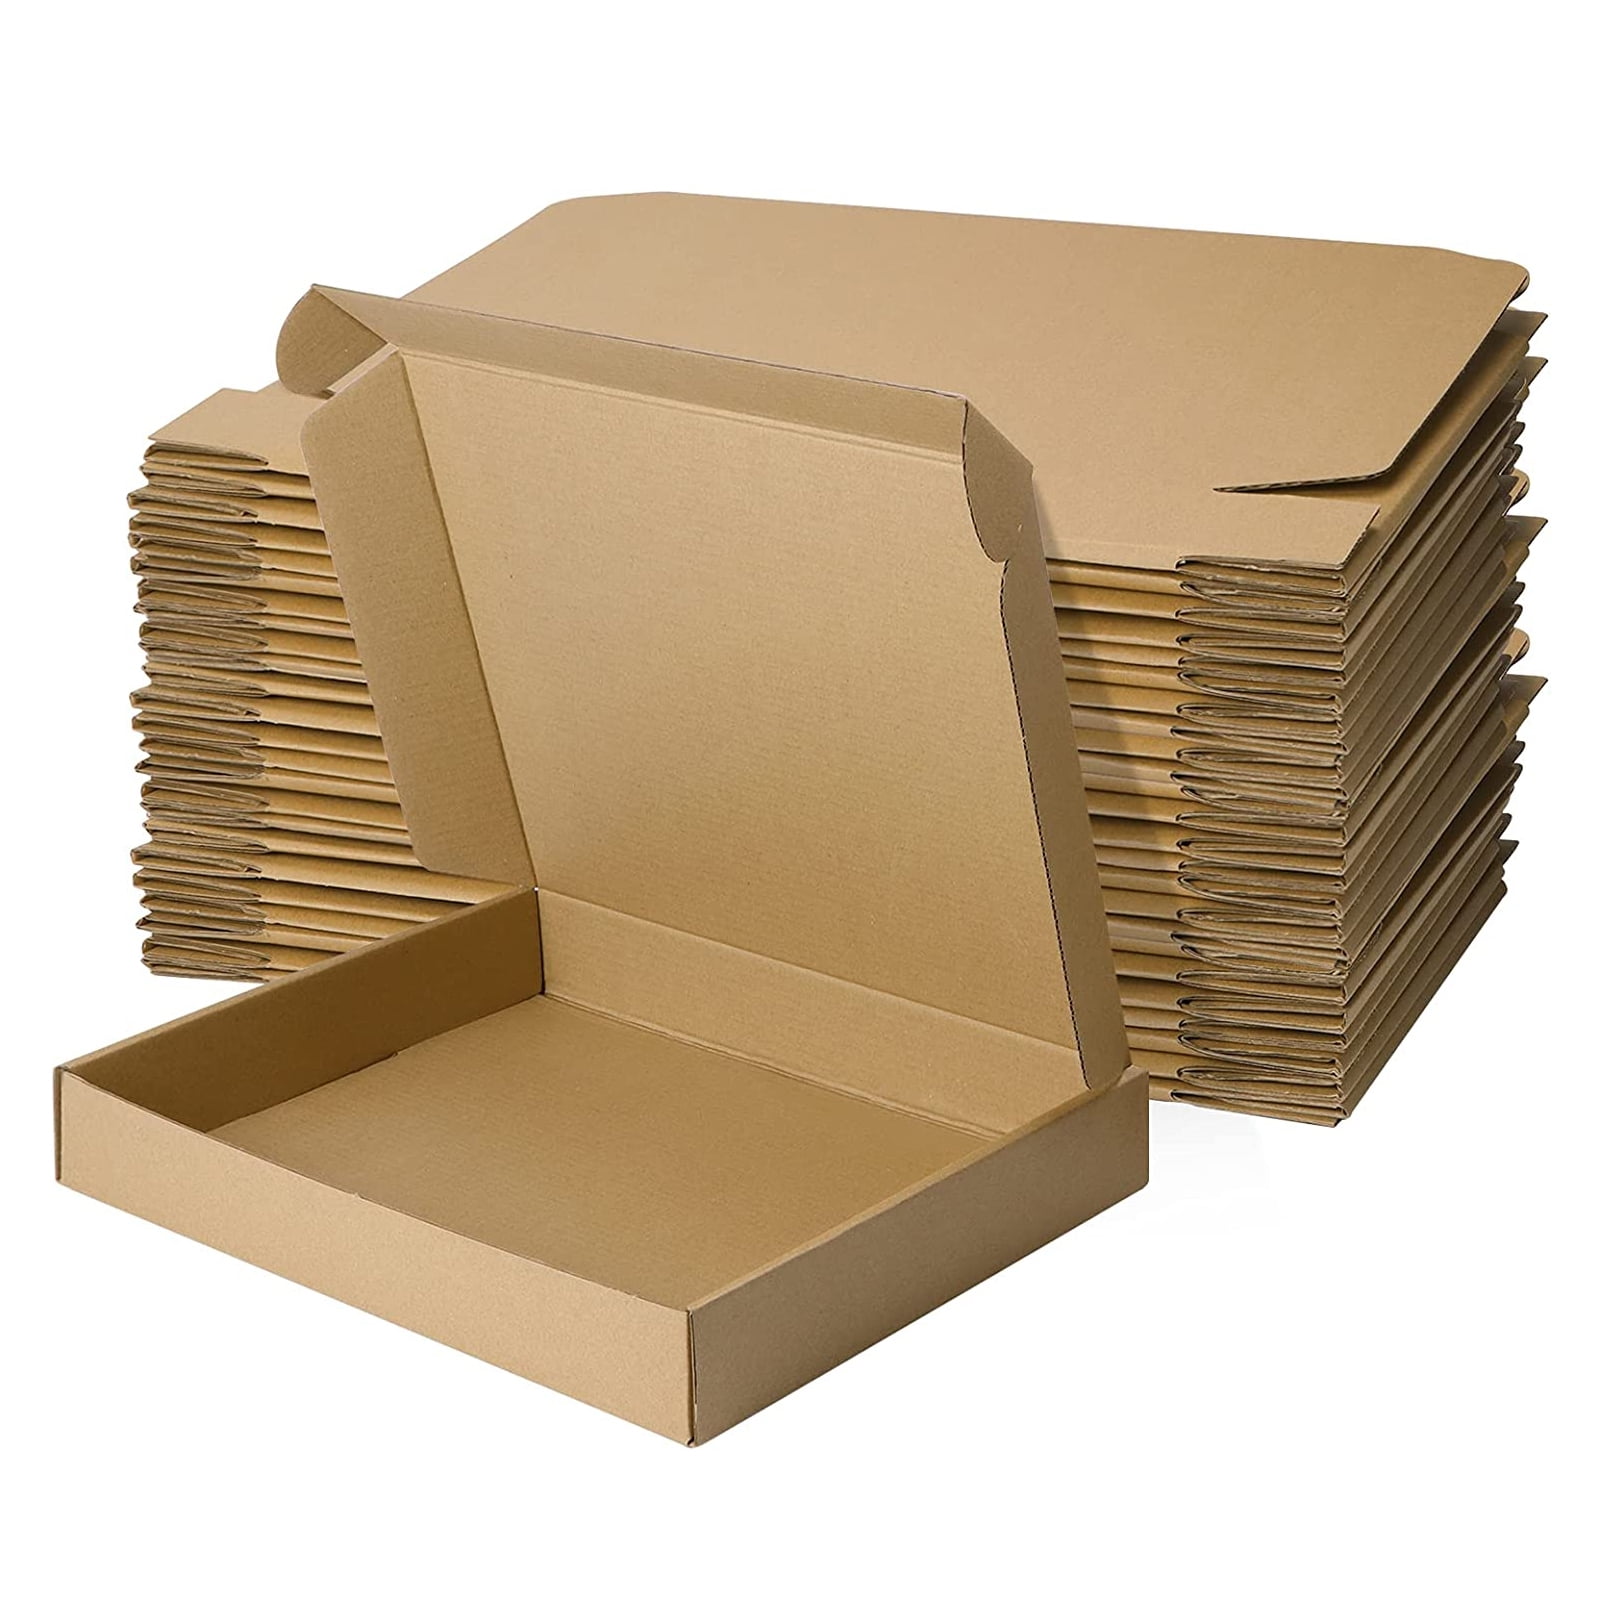 25 10x6x4 Cardboard Paper Boxes Mailing Packing Shipping Box Corrugated  Carton